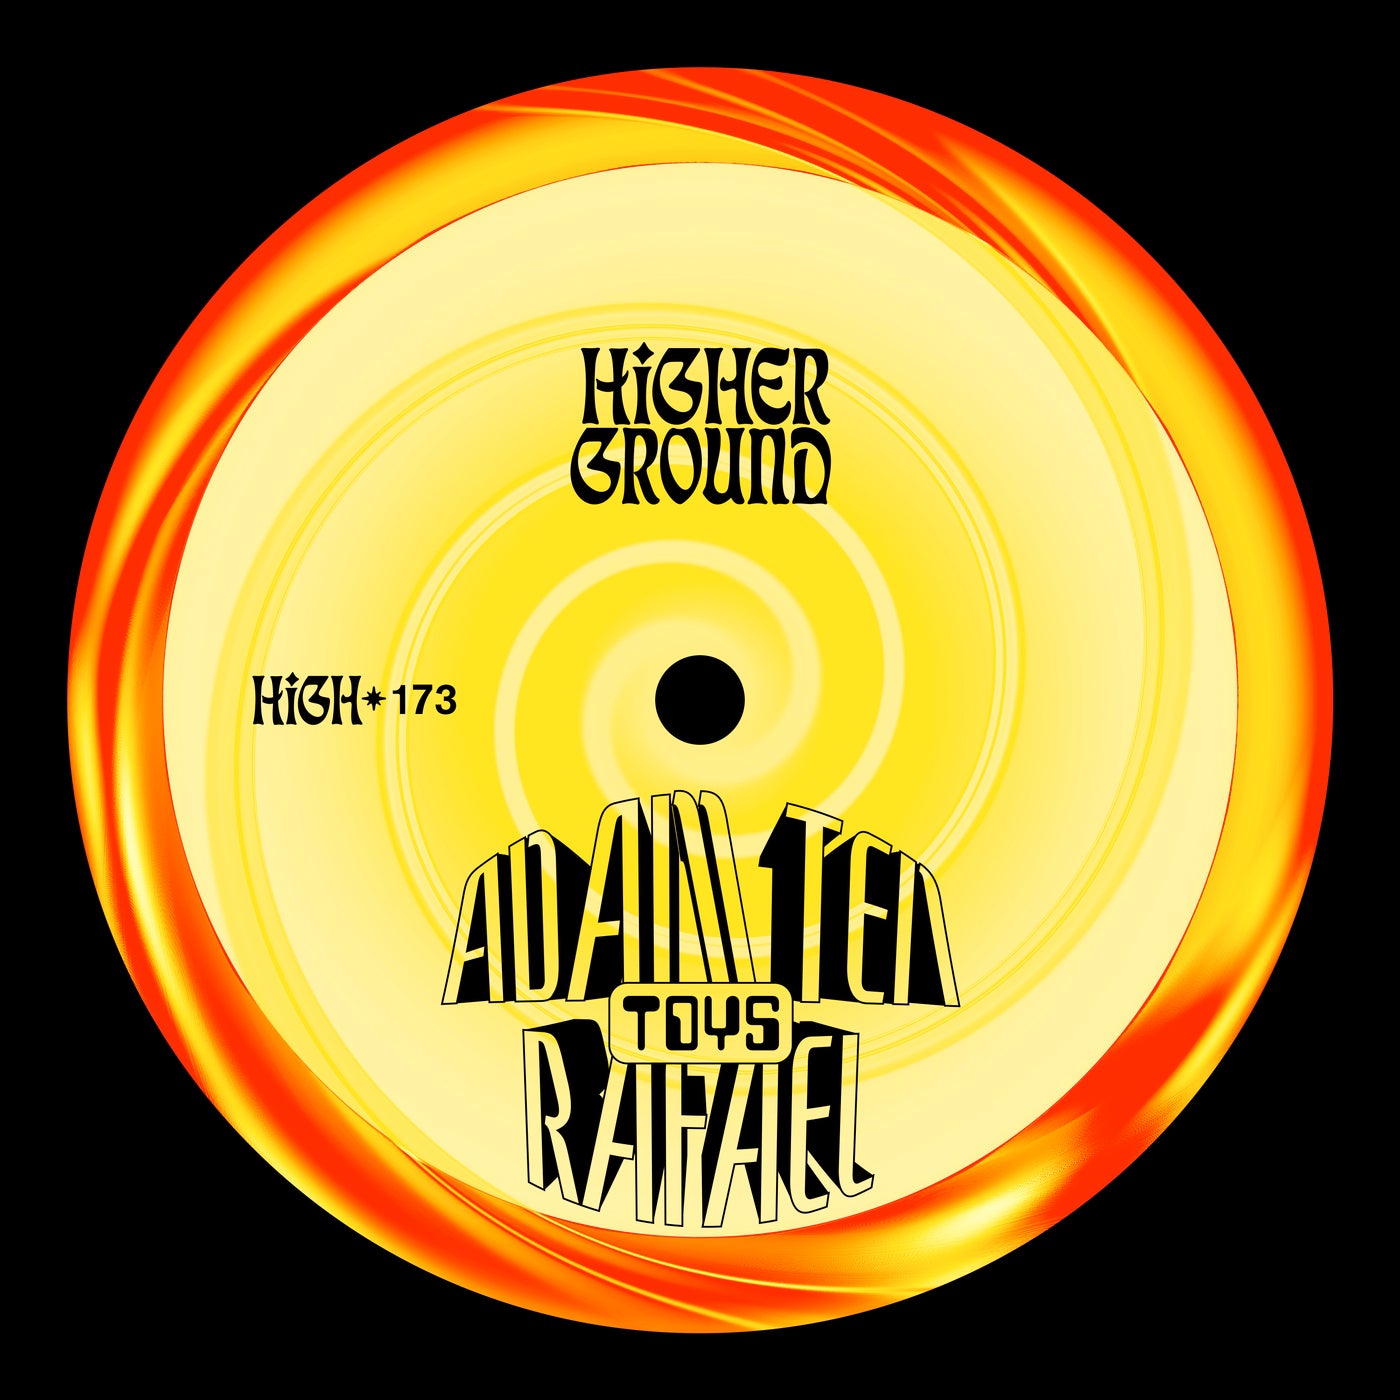 image cover: Rafael, Adam Ten - Toys (Extended) on Higher Ground